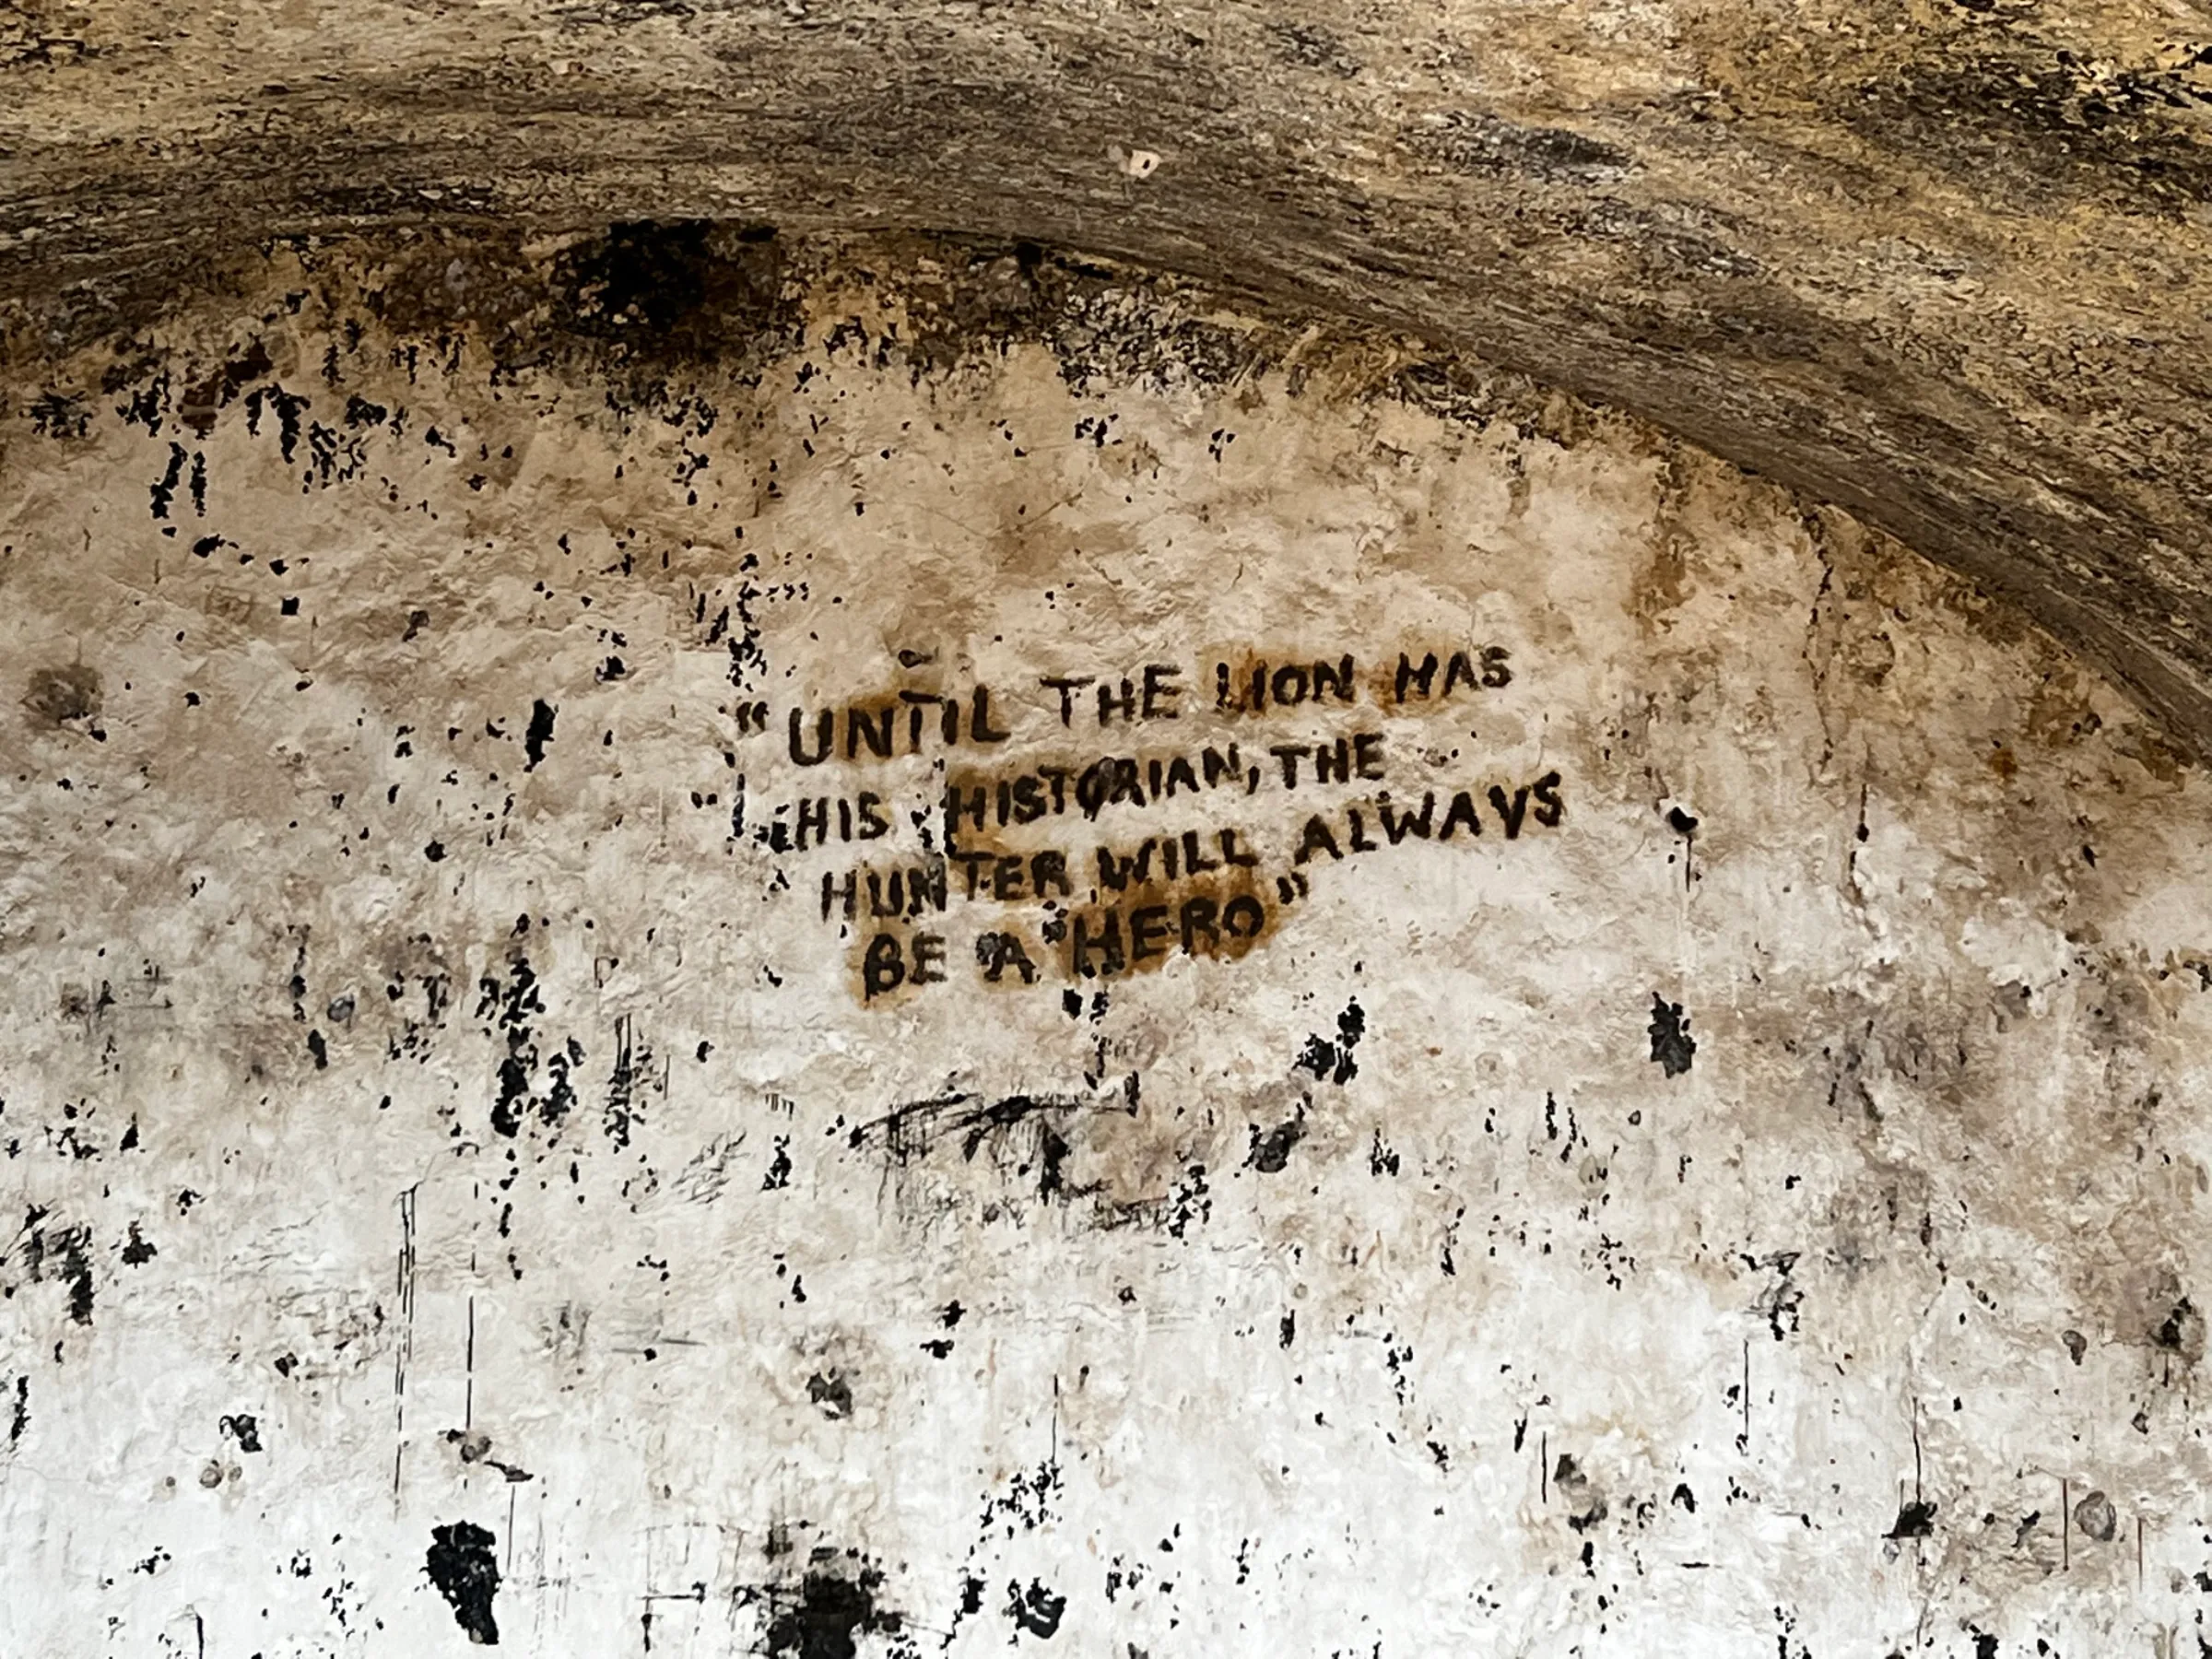 Words etched on the wall of a slave-holding cell at Fort Prinzenstein, an 18th century slave-holding depot, in Keta, Ghana on August 8, 2022. The words read: 'UNTIL THE LION HAS HIS HISTORIAN, THE HUNTER WILL ALWAYS BE A 'HERO'. Thomson Reuters Foundation/Nita Bhalla